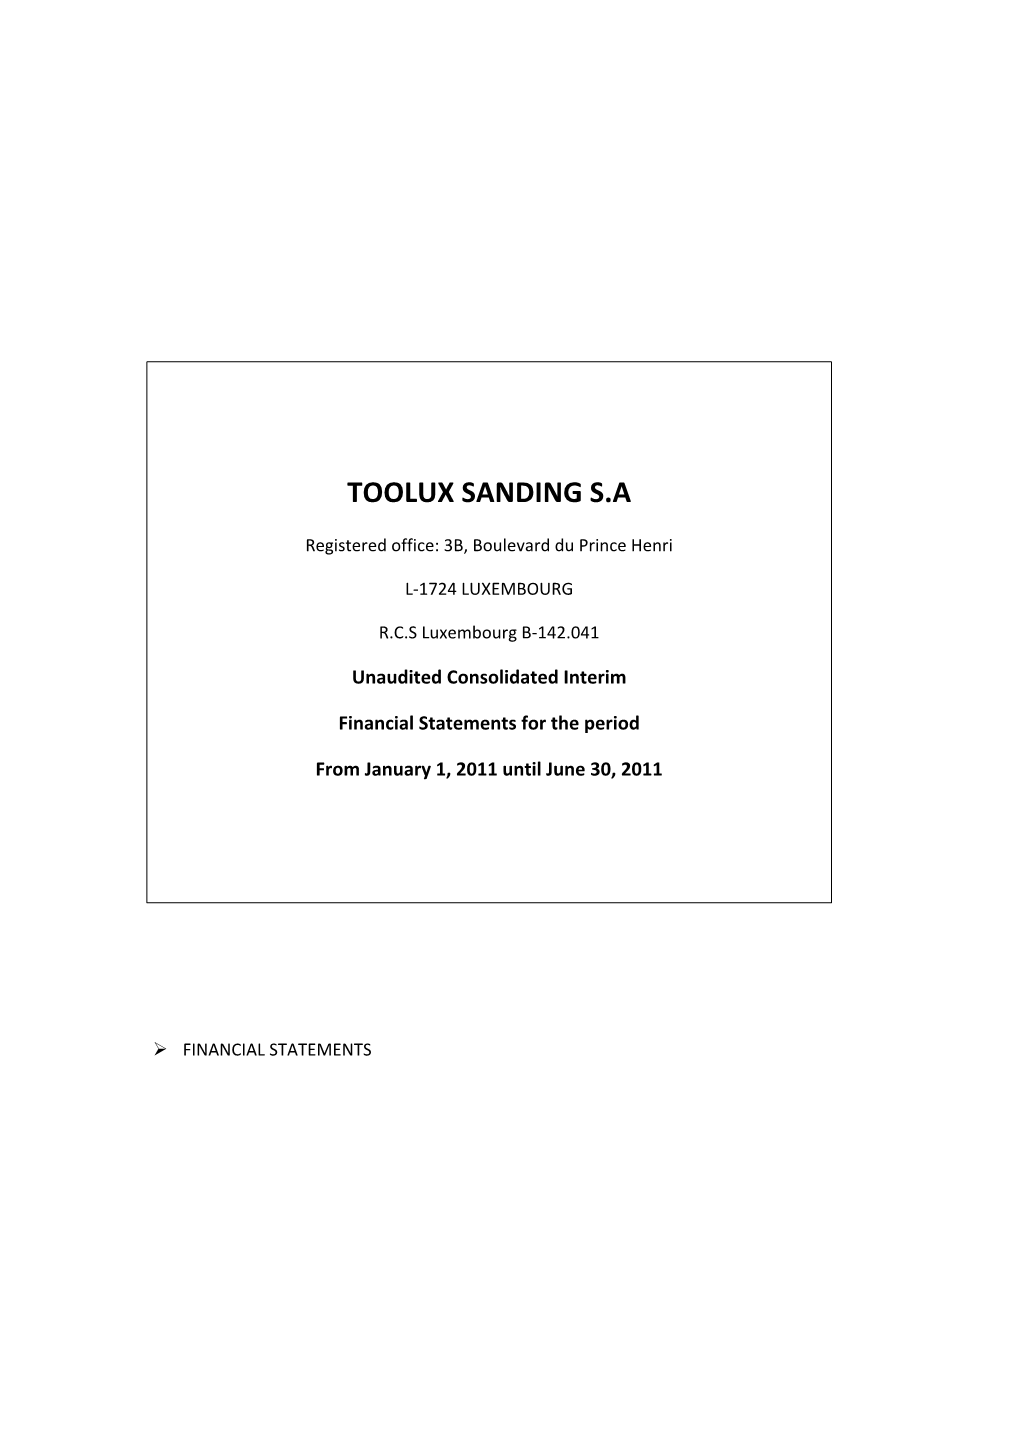 Toolux Sanding SA Notes to the Consolidated Interim Financial Statements for the Six Months Period Ended June 30, 2011